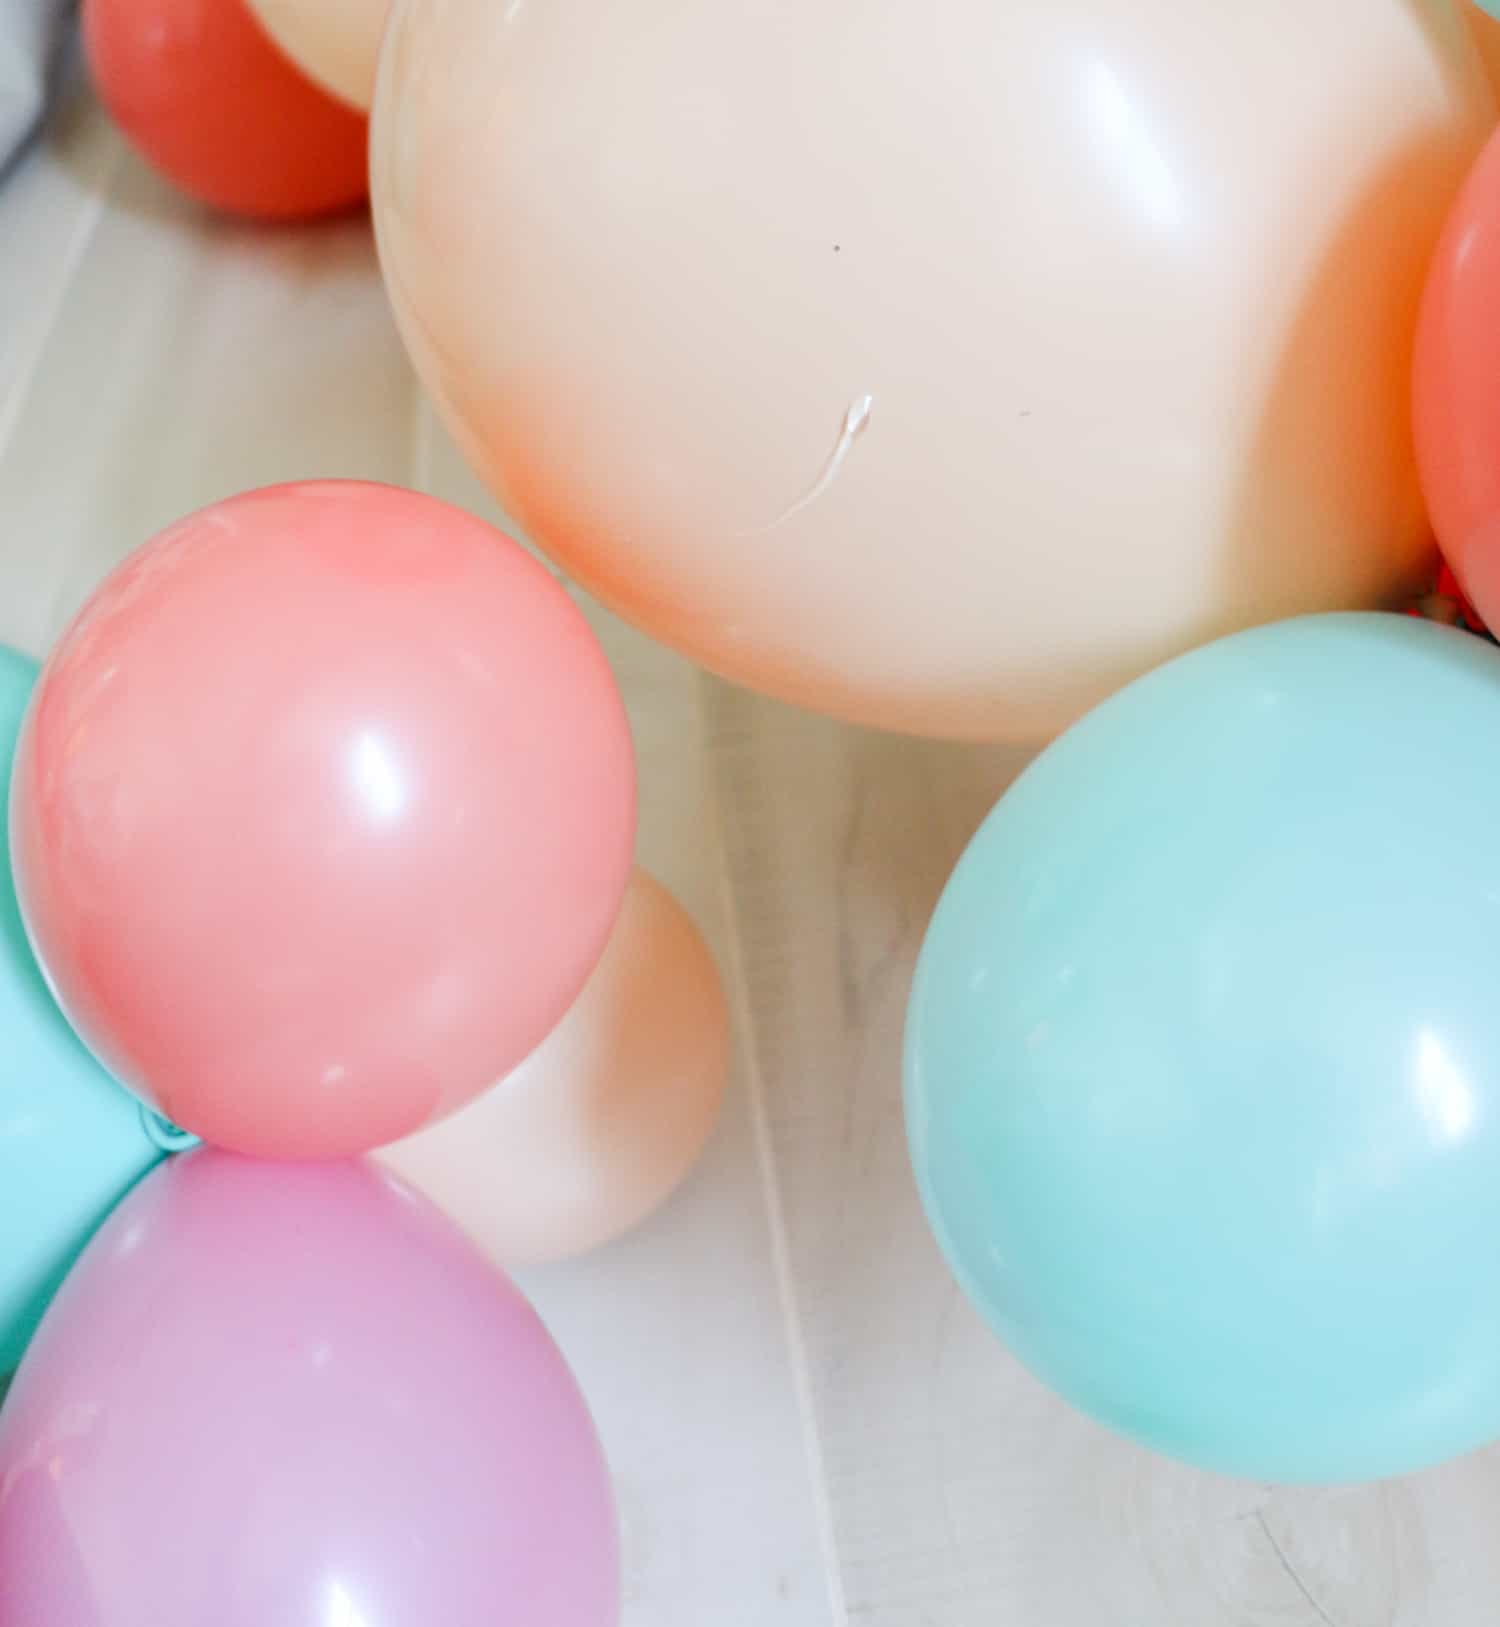 Make a Balloon Garland for your Front Door